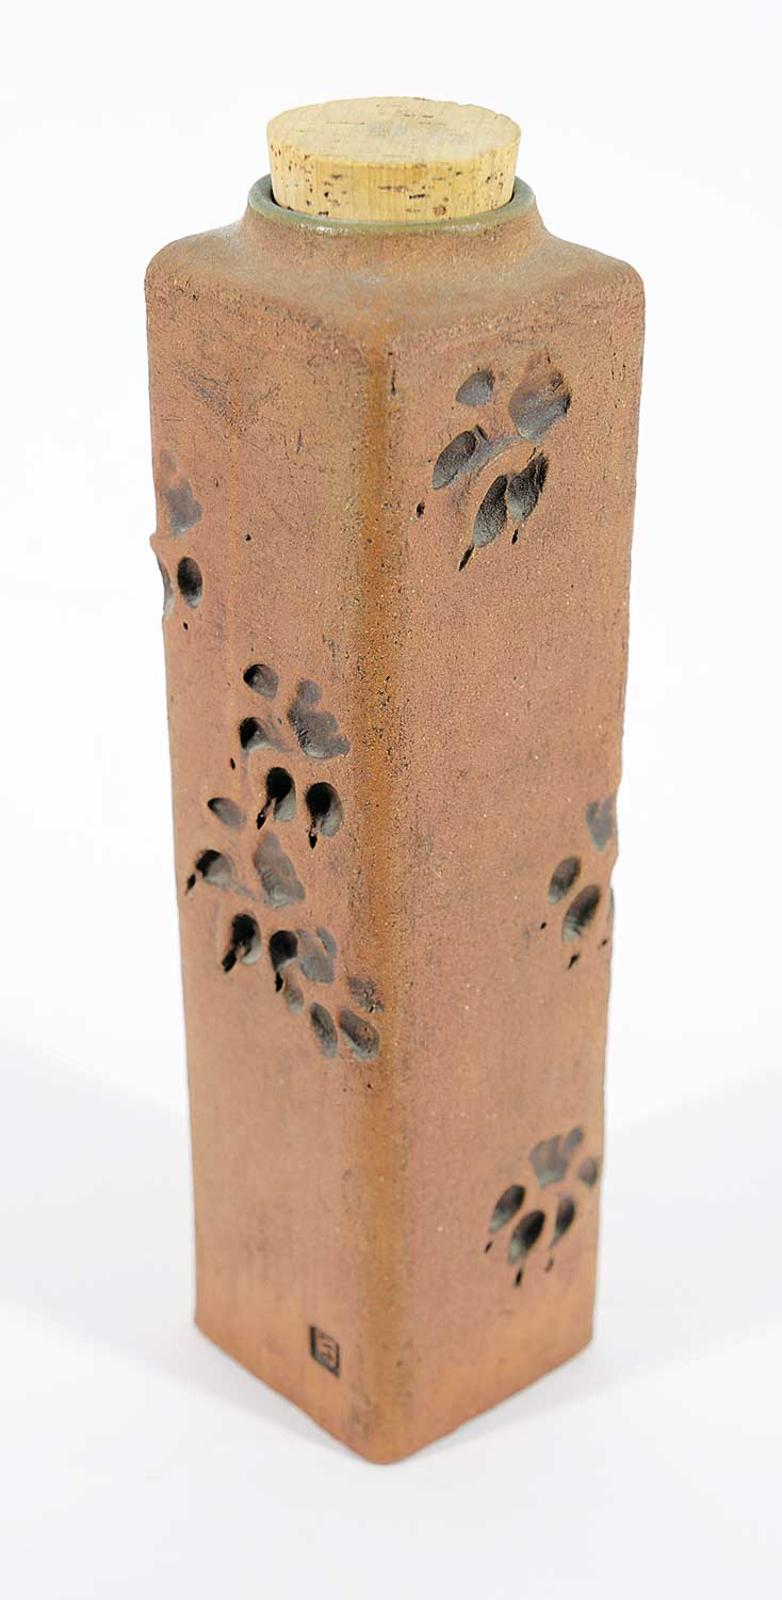 Kathleen Hamilton - Untitled - Brown Square Vase with Cork Stopper